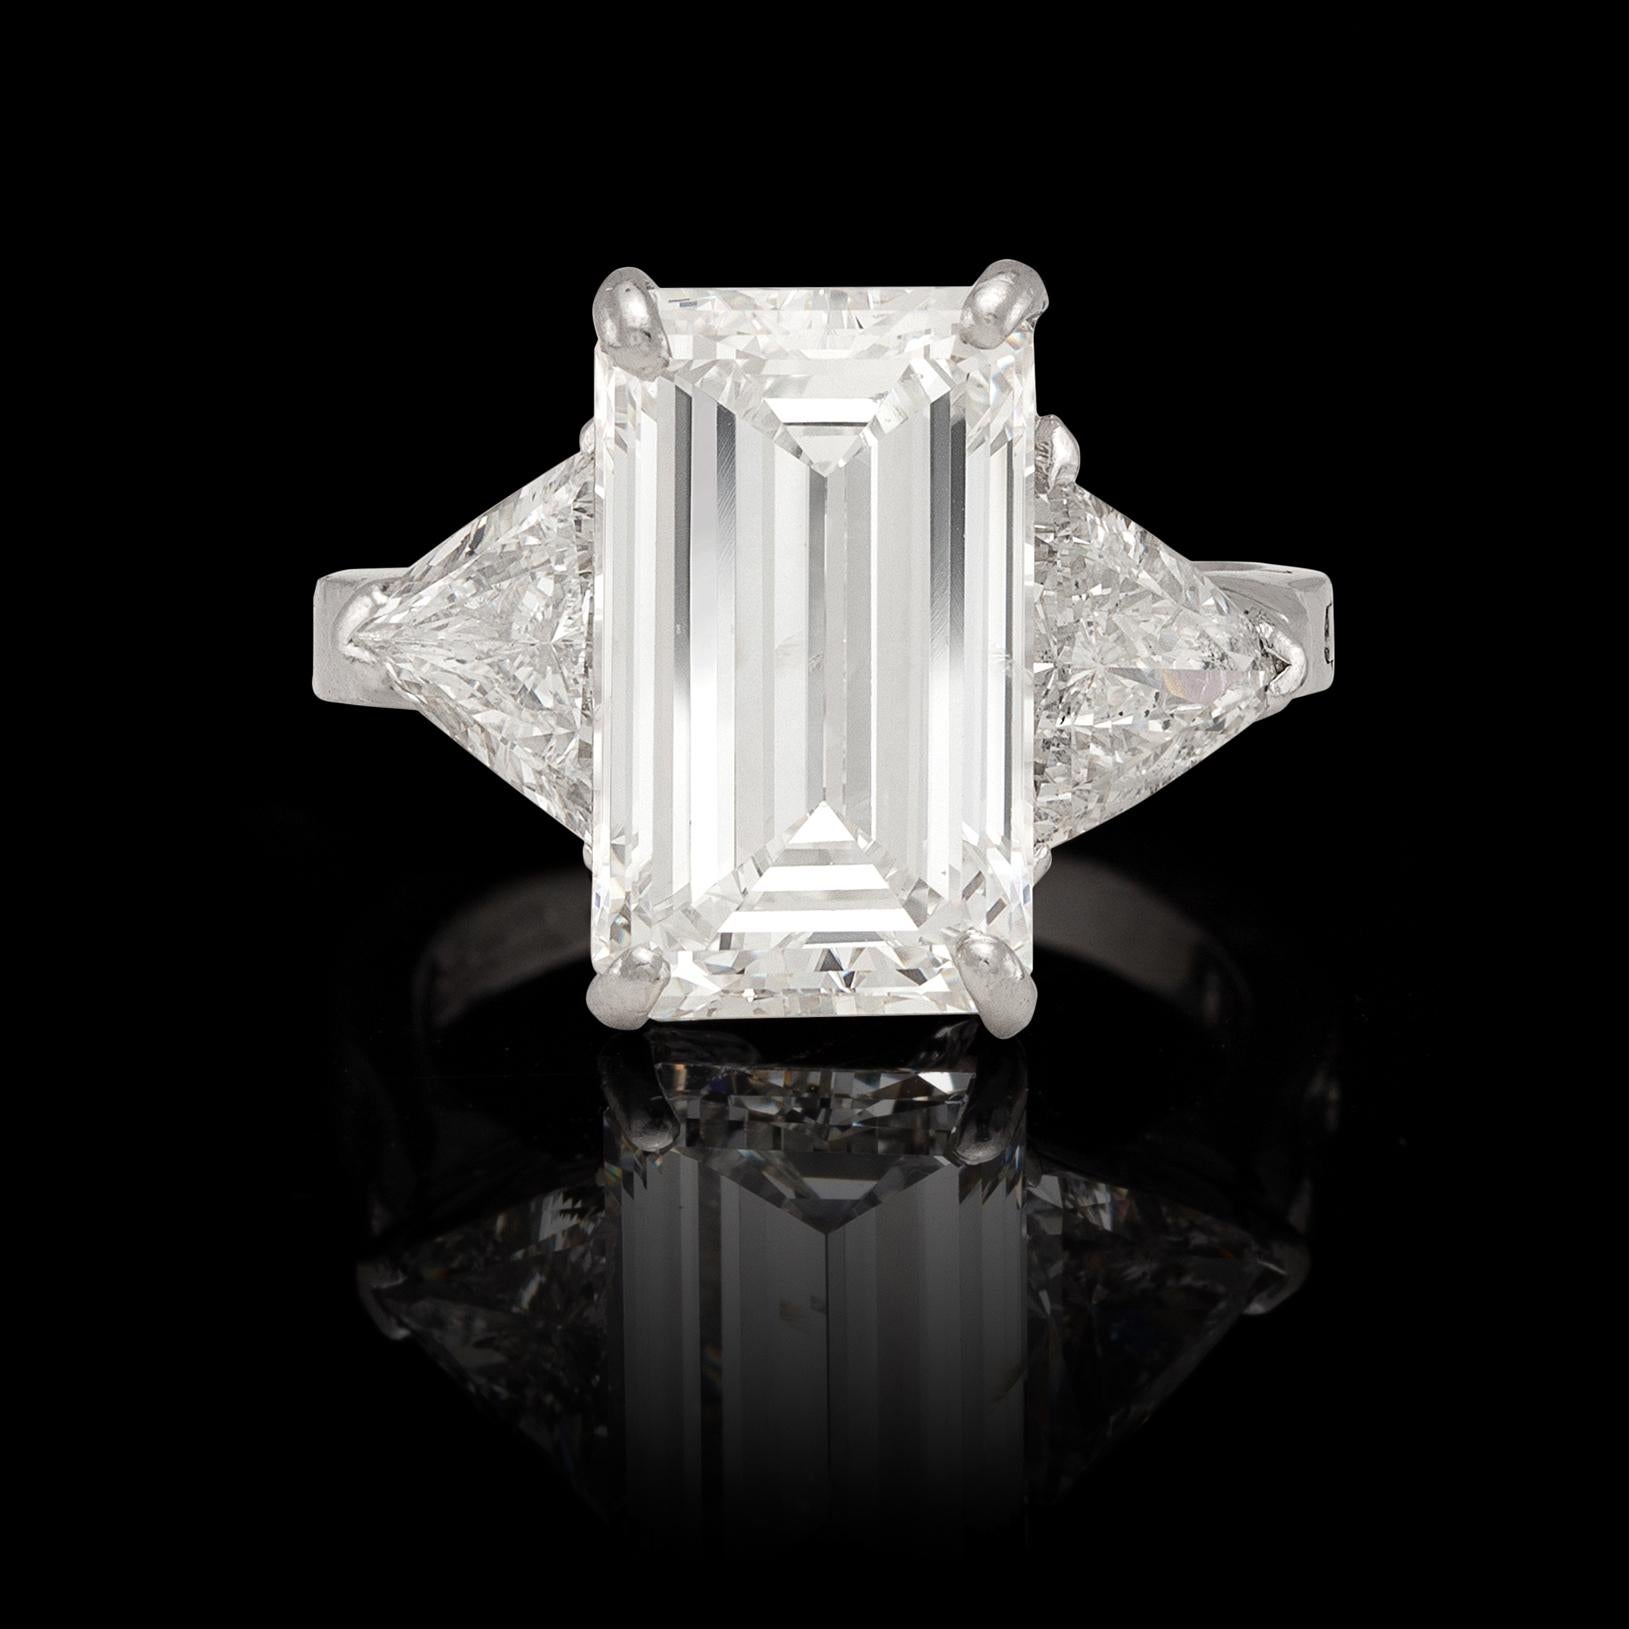 A superb platinum ring, featuring an incredibly bright 6.23- cts. emerald-cut diamond, with GIA grade of G/SI2, and set on either side with triangular-cut diamonds, weighing together an estimated 3.10 carats. The ring weighs 11 grams, and is